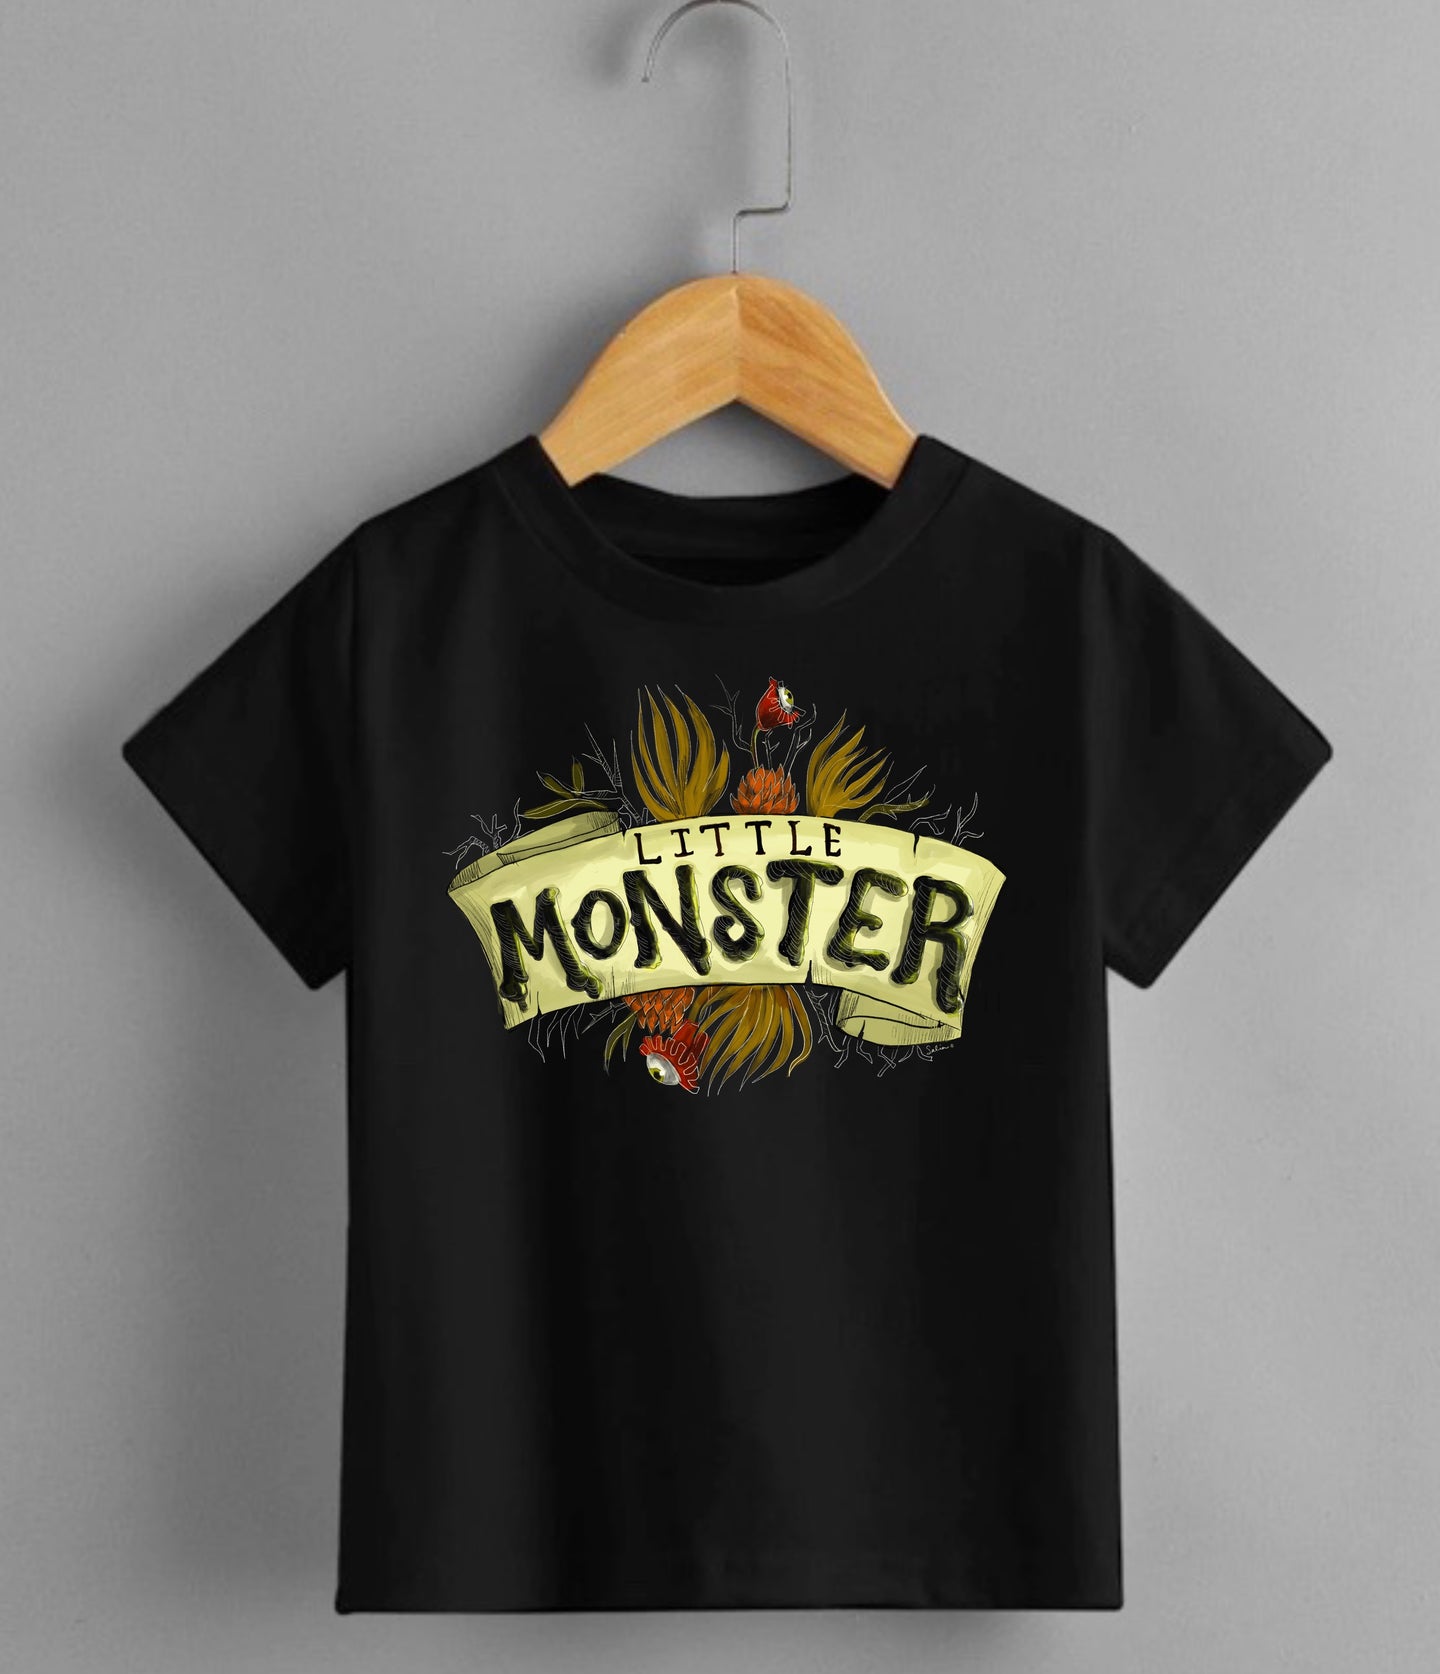 Monster- Classic [READY Edition TO Little – - SHI Children\'s Tee Tito Raising - Black